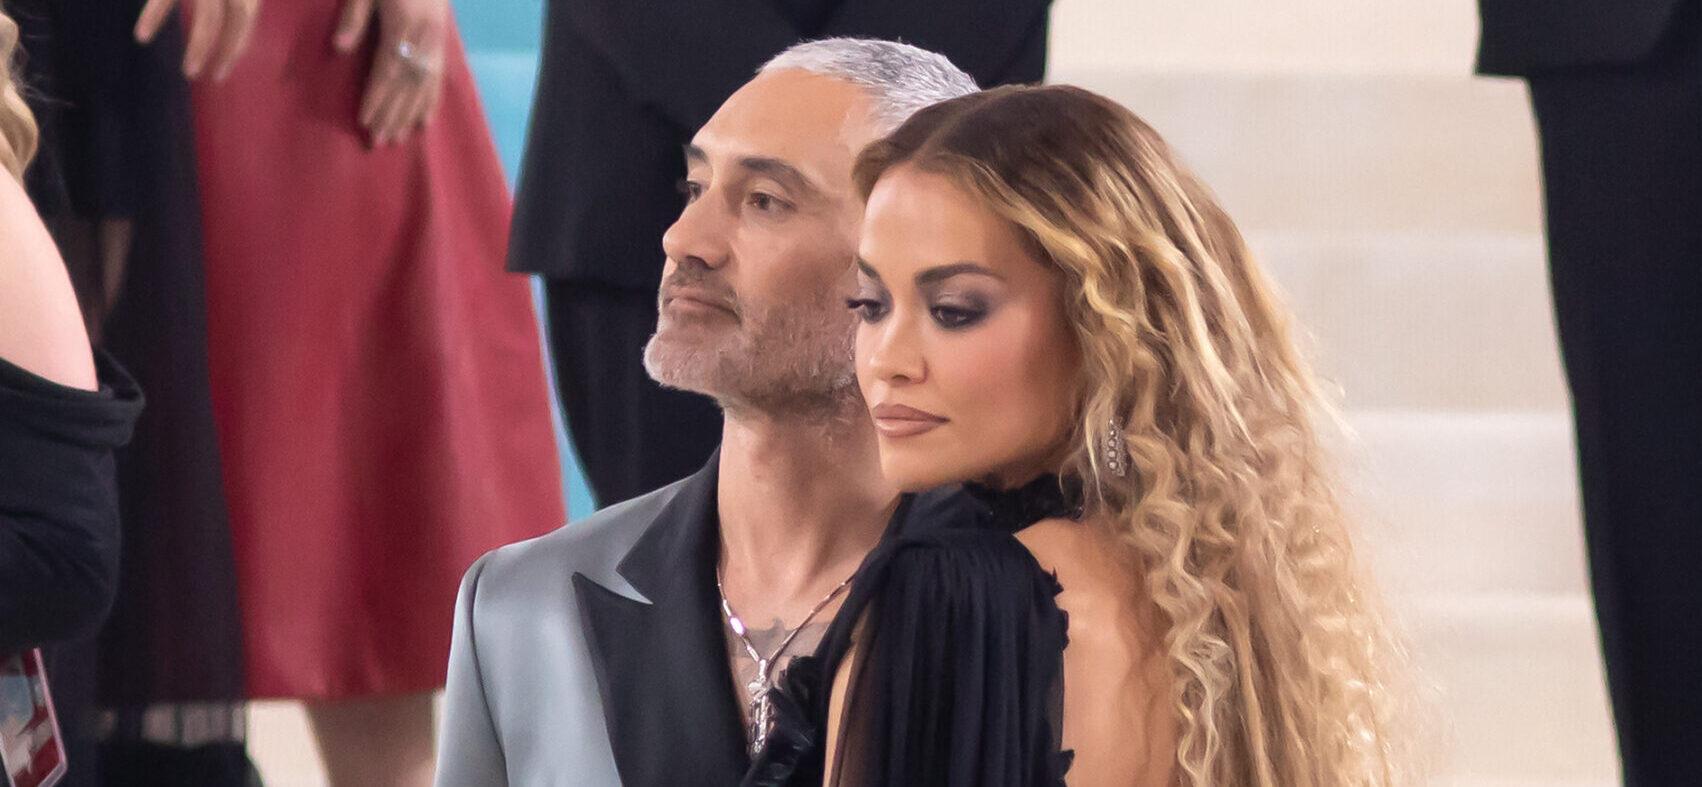 Rita Ora Gives Insight Into Top Secret Wedding To Taika Waititi Which She Planned in Just Days